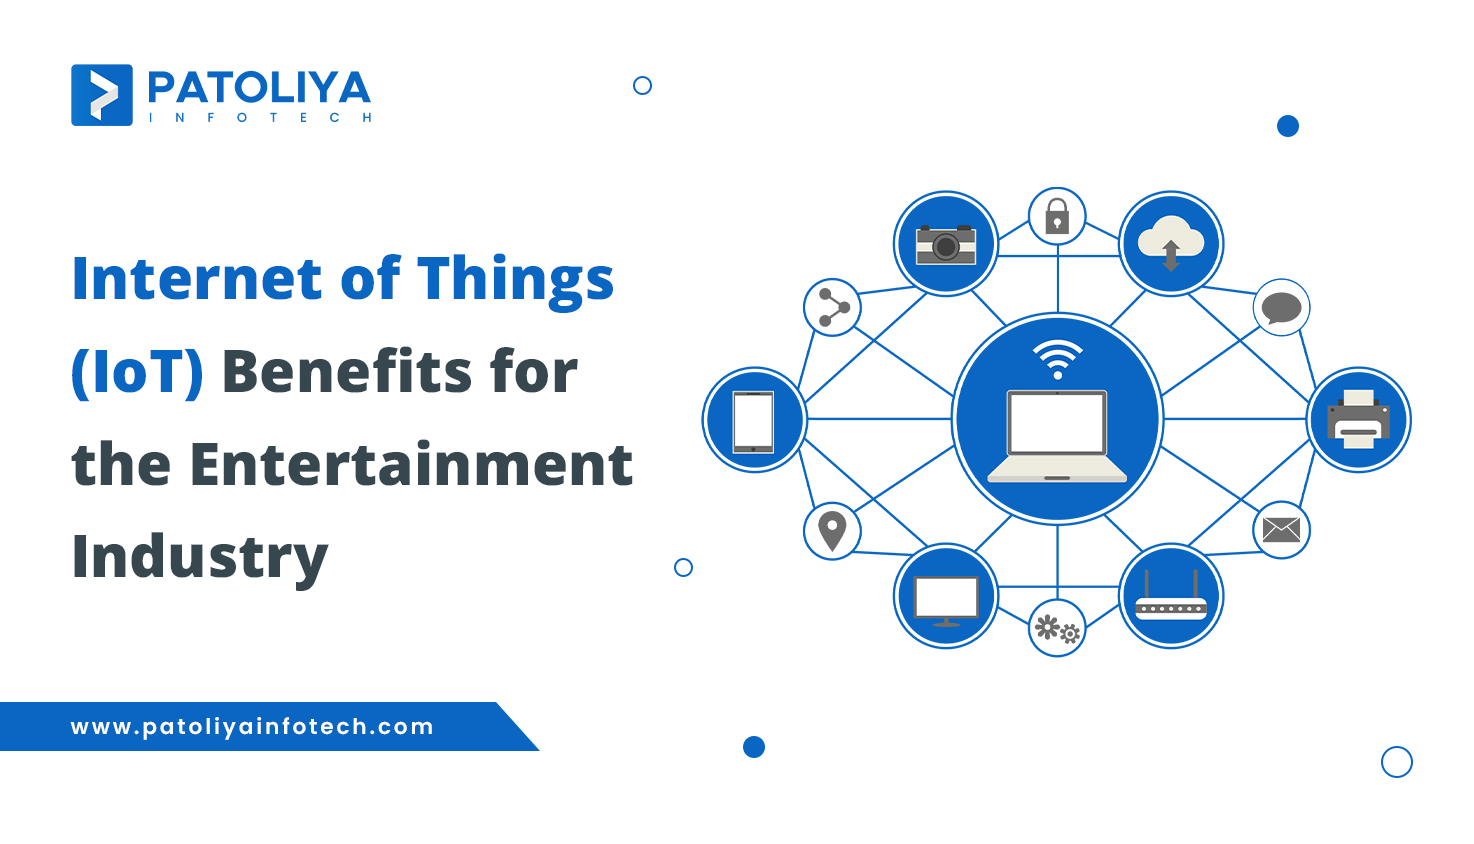 Internet of Things (IoT) Benefits for the Entertainment Industry